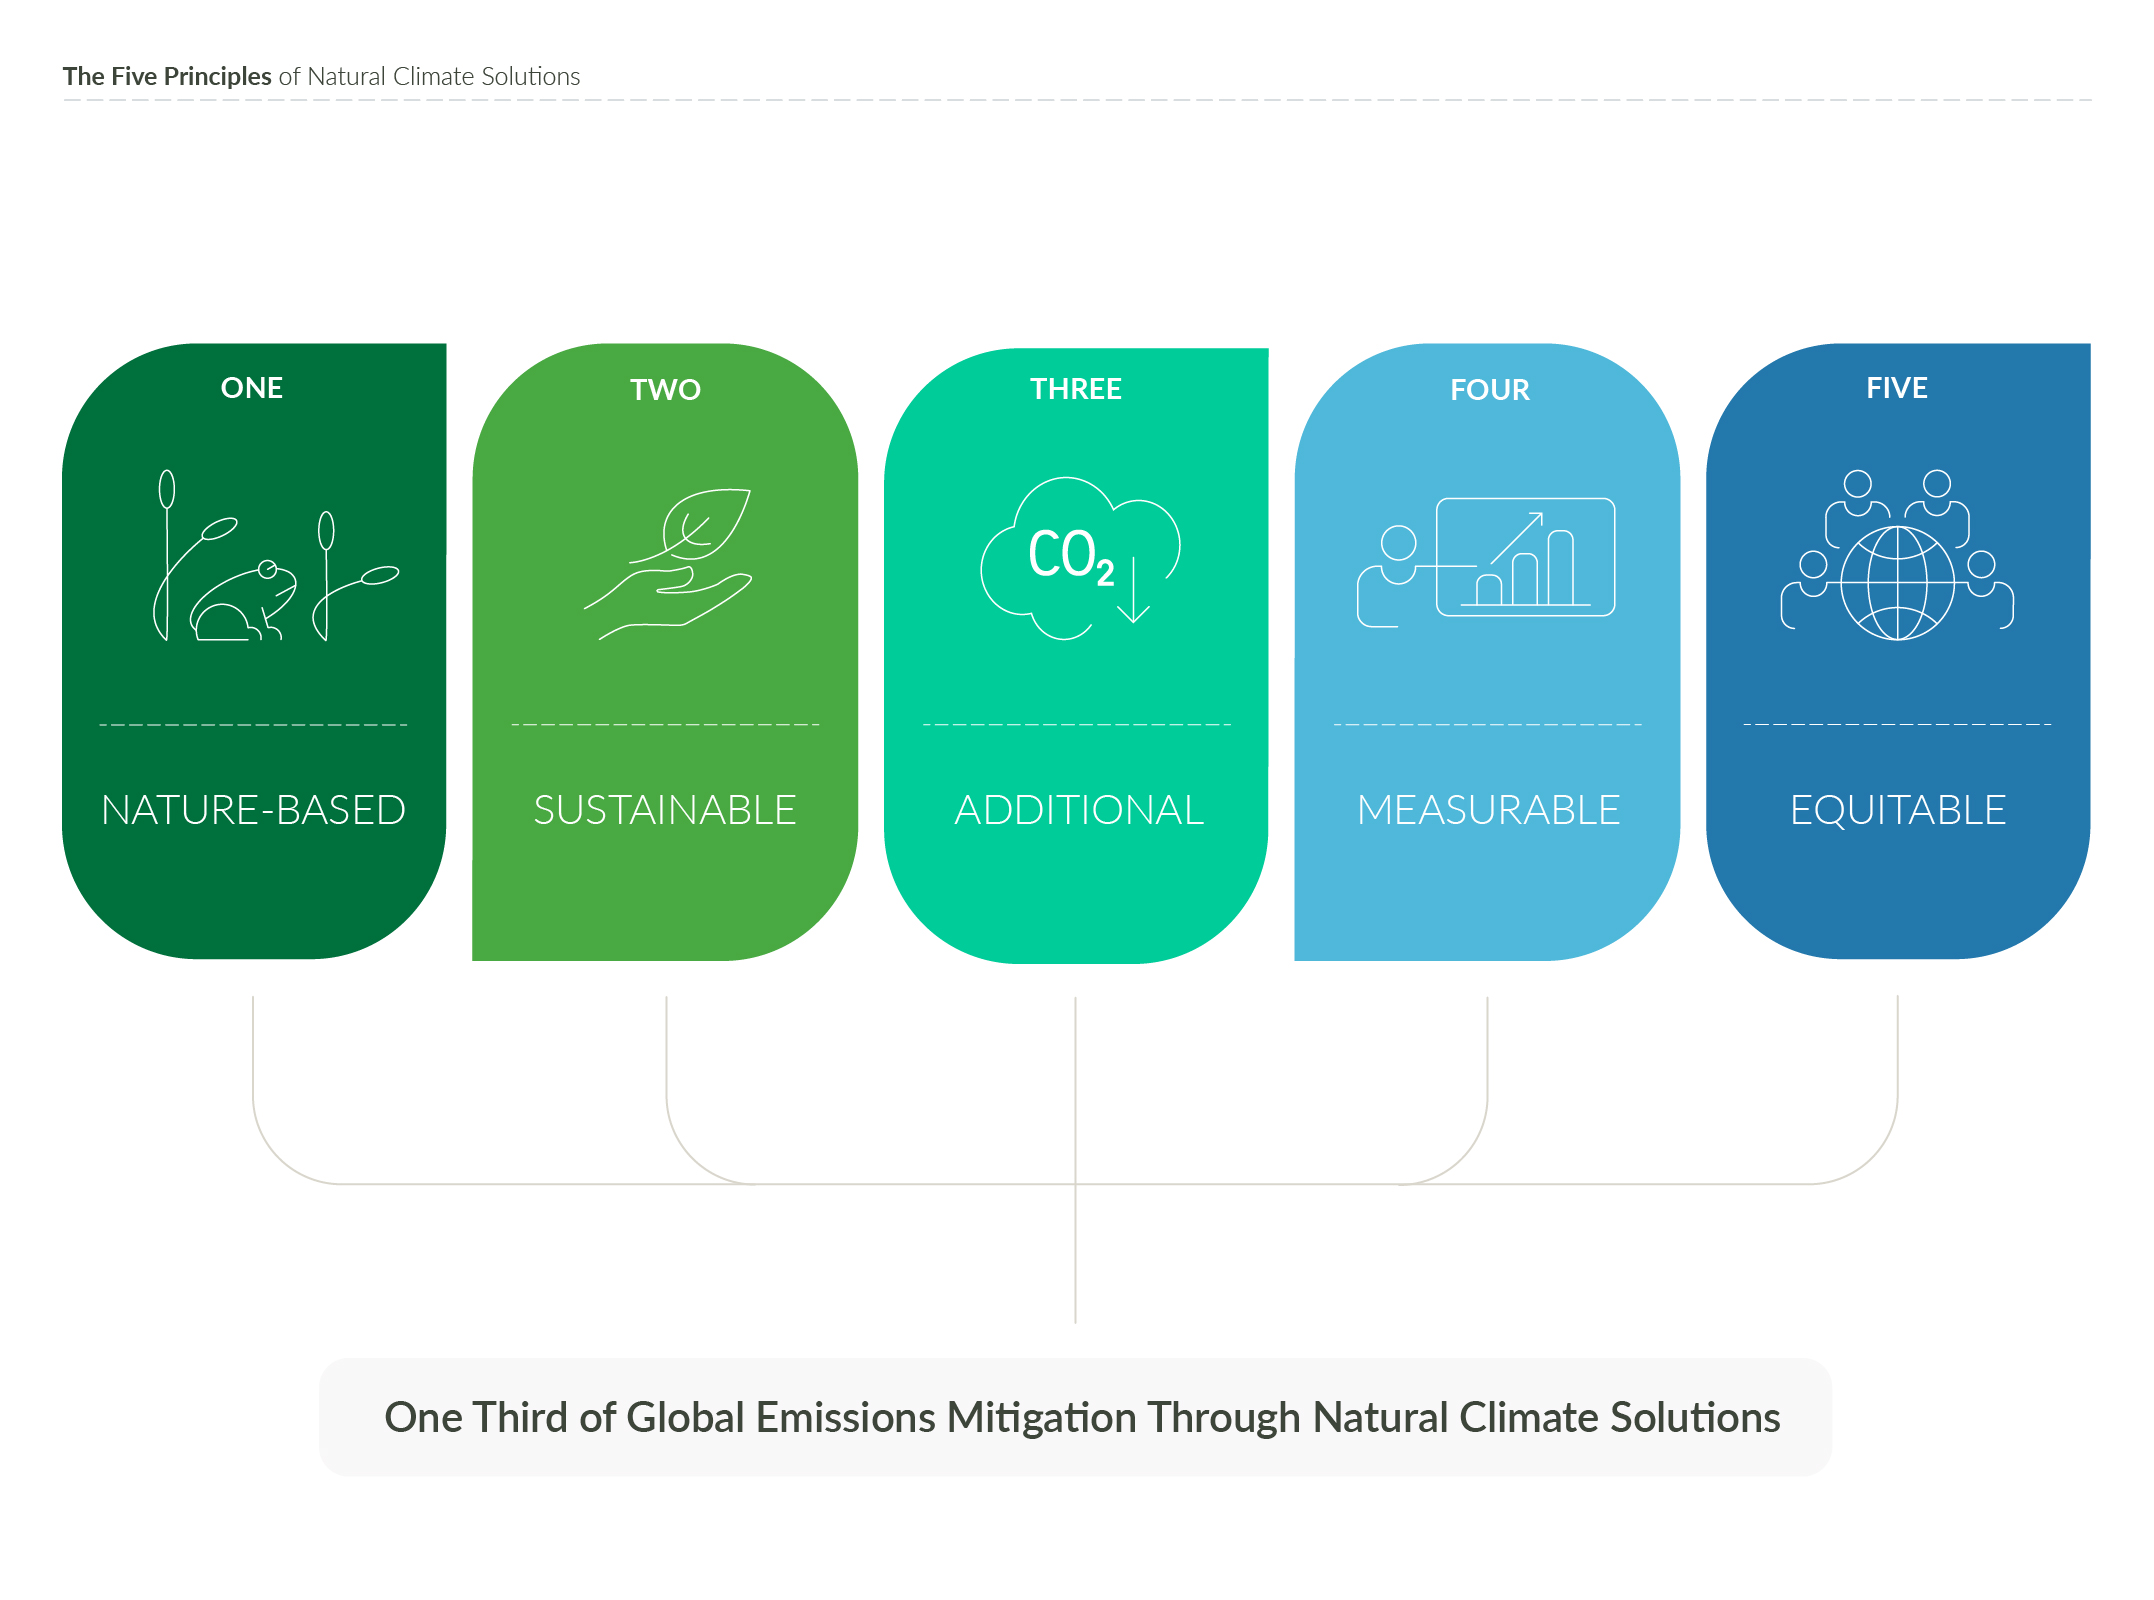 an illustration of the five principles of natural climate solutions